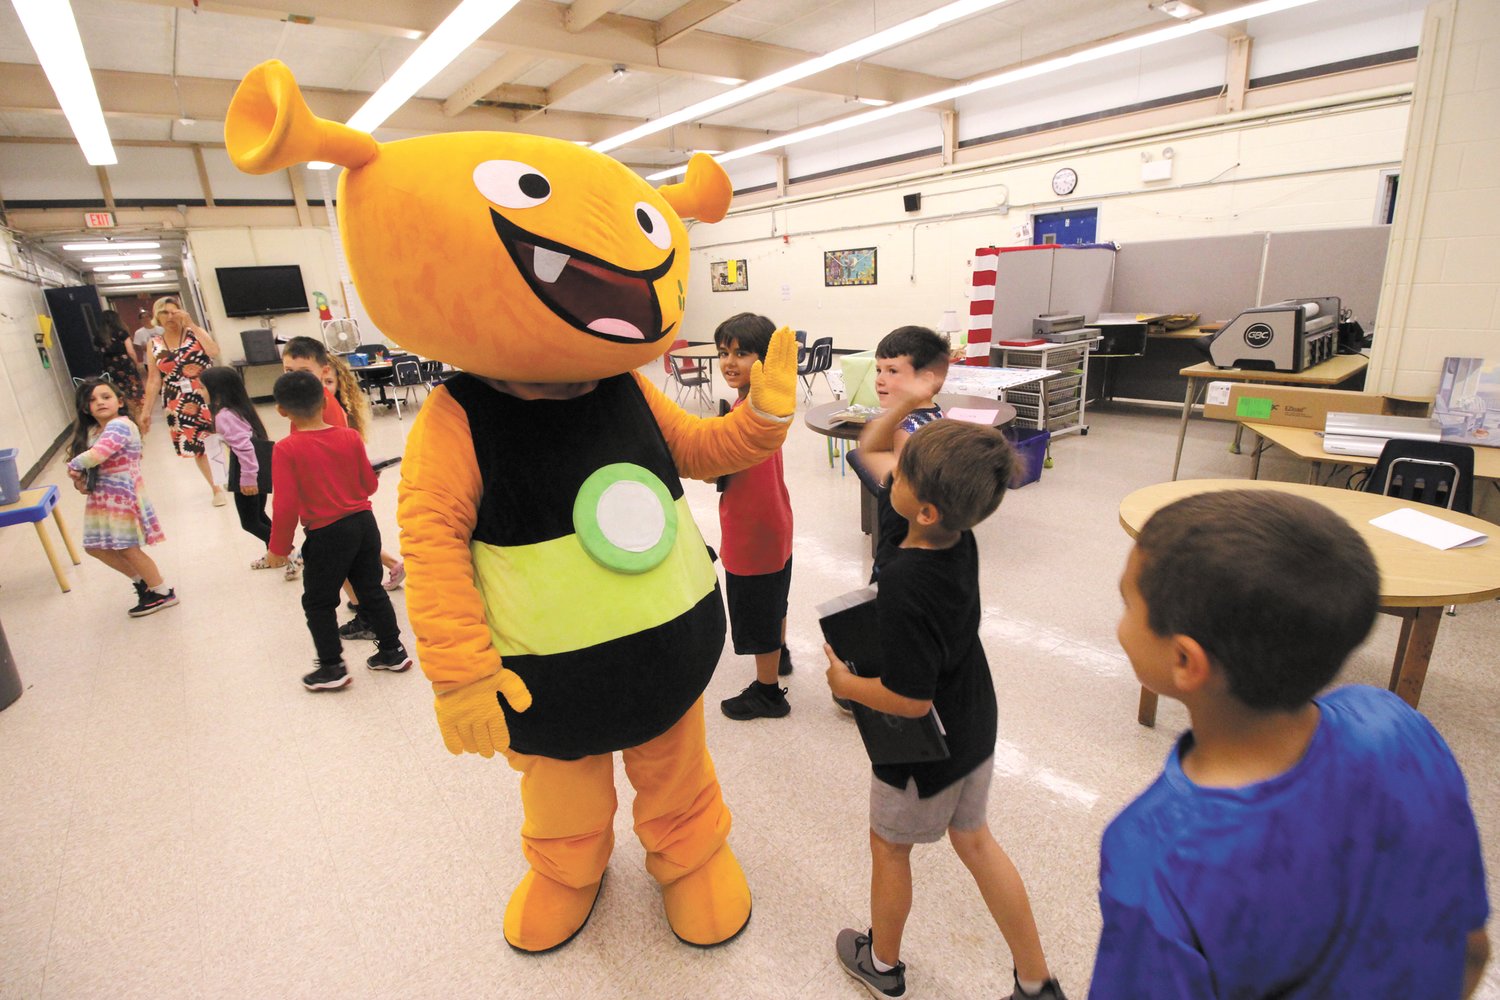 THEY LOVE HER: Plory gives high-fives to Park Elementary students. The character from iReady math programs visited all Warwick elementary schools at the end of the academic year to recognize their dramatic improvement in math proficiency. (Warwick Beacon photos)